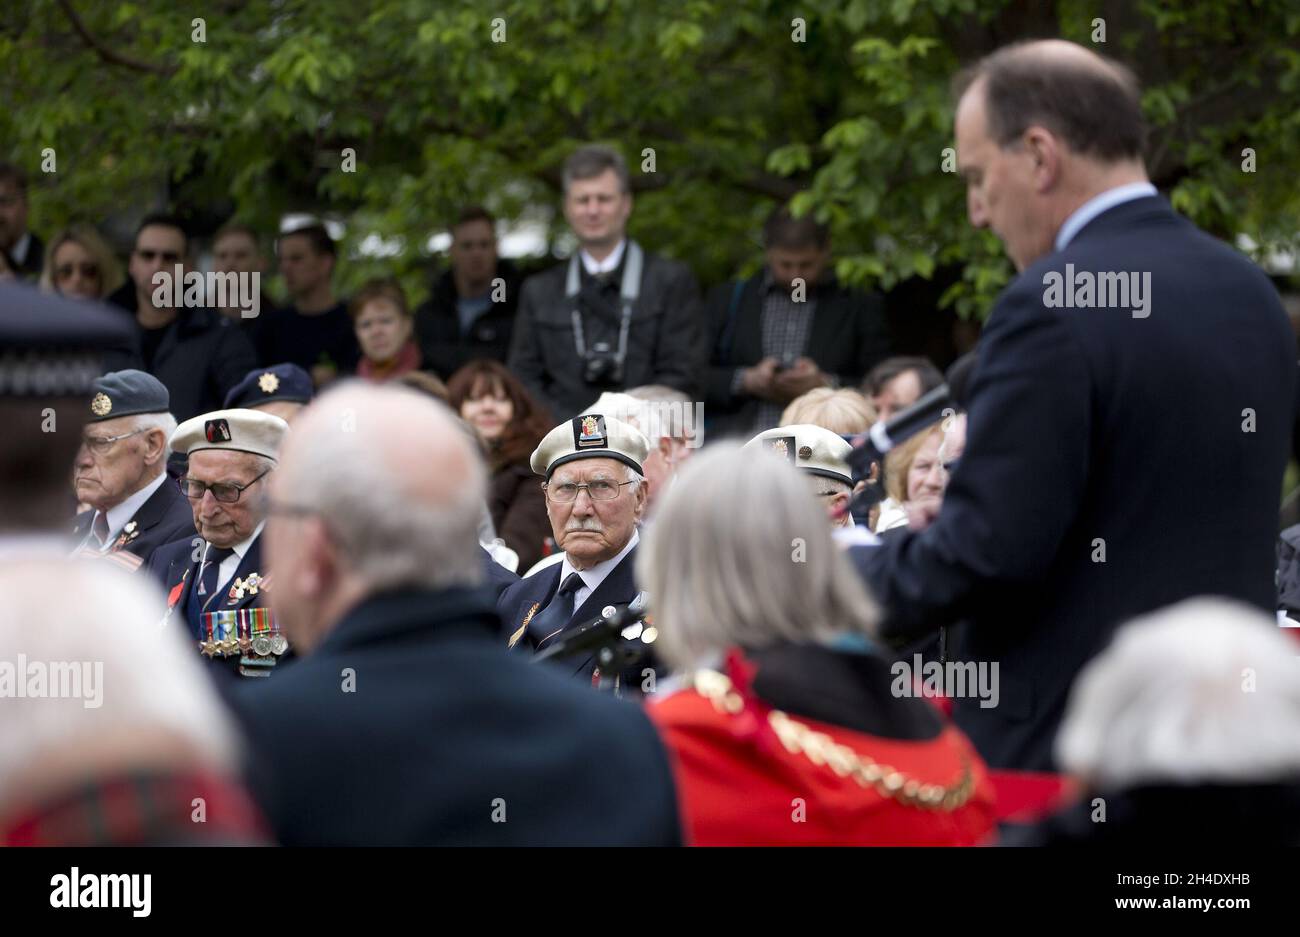 Former Liberal Democrat MP Simon Hughes delivers a speech during Victory Day celebrations at the Soviet War Memorial in London, to mark the 72nd anniversary of the victory of the Soviet Army and its Allies over Nazi Germany in World War II. Picture dated: Tuesday May 9, 2017. Photo credit should read: Isabel Infantes / EMPICS Entertainment. Stock Photo